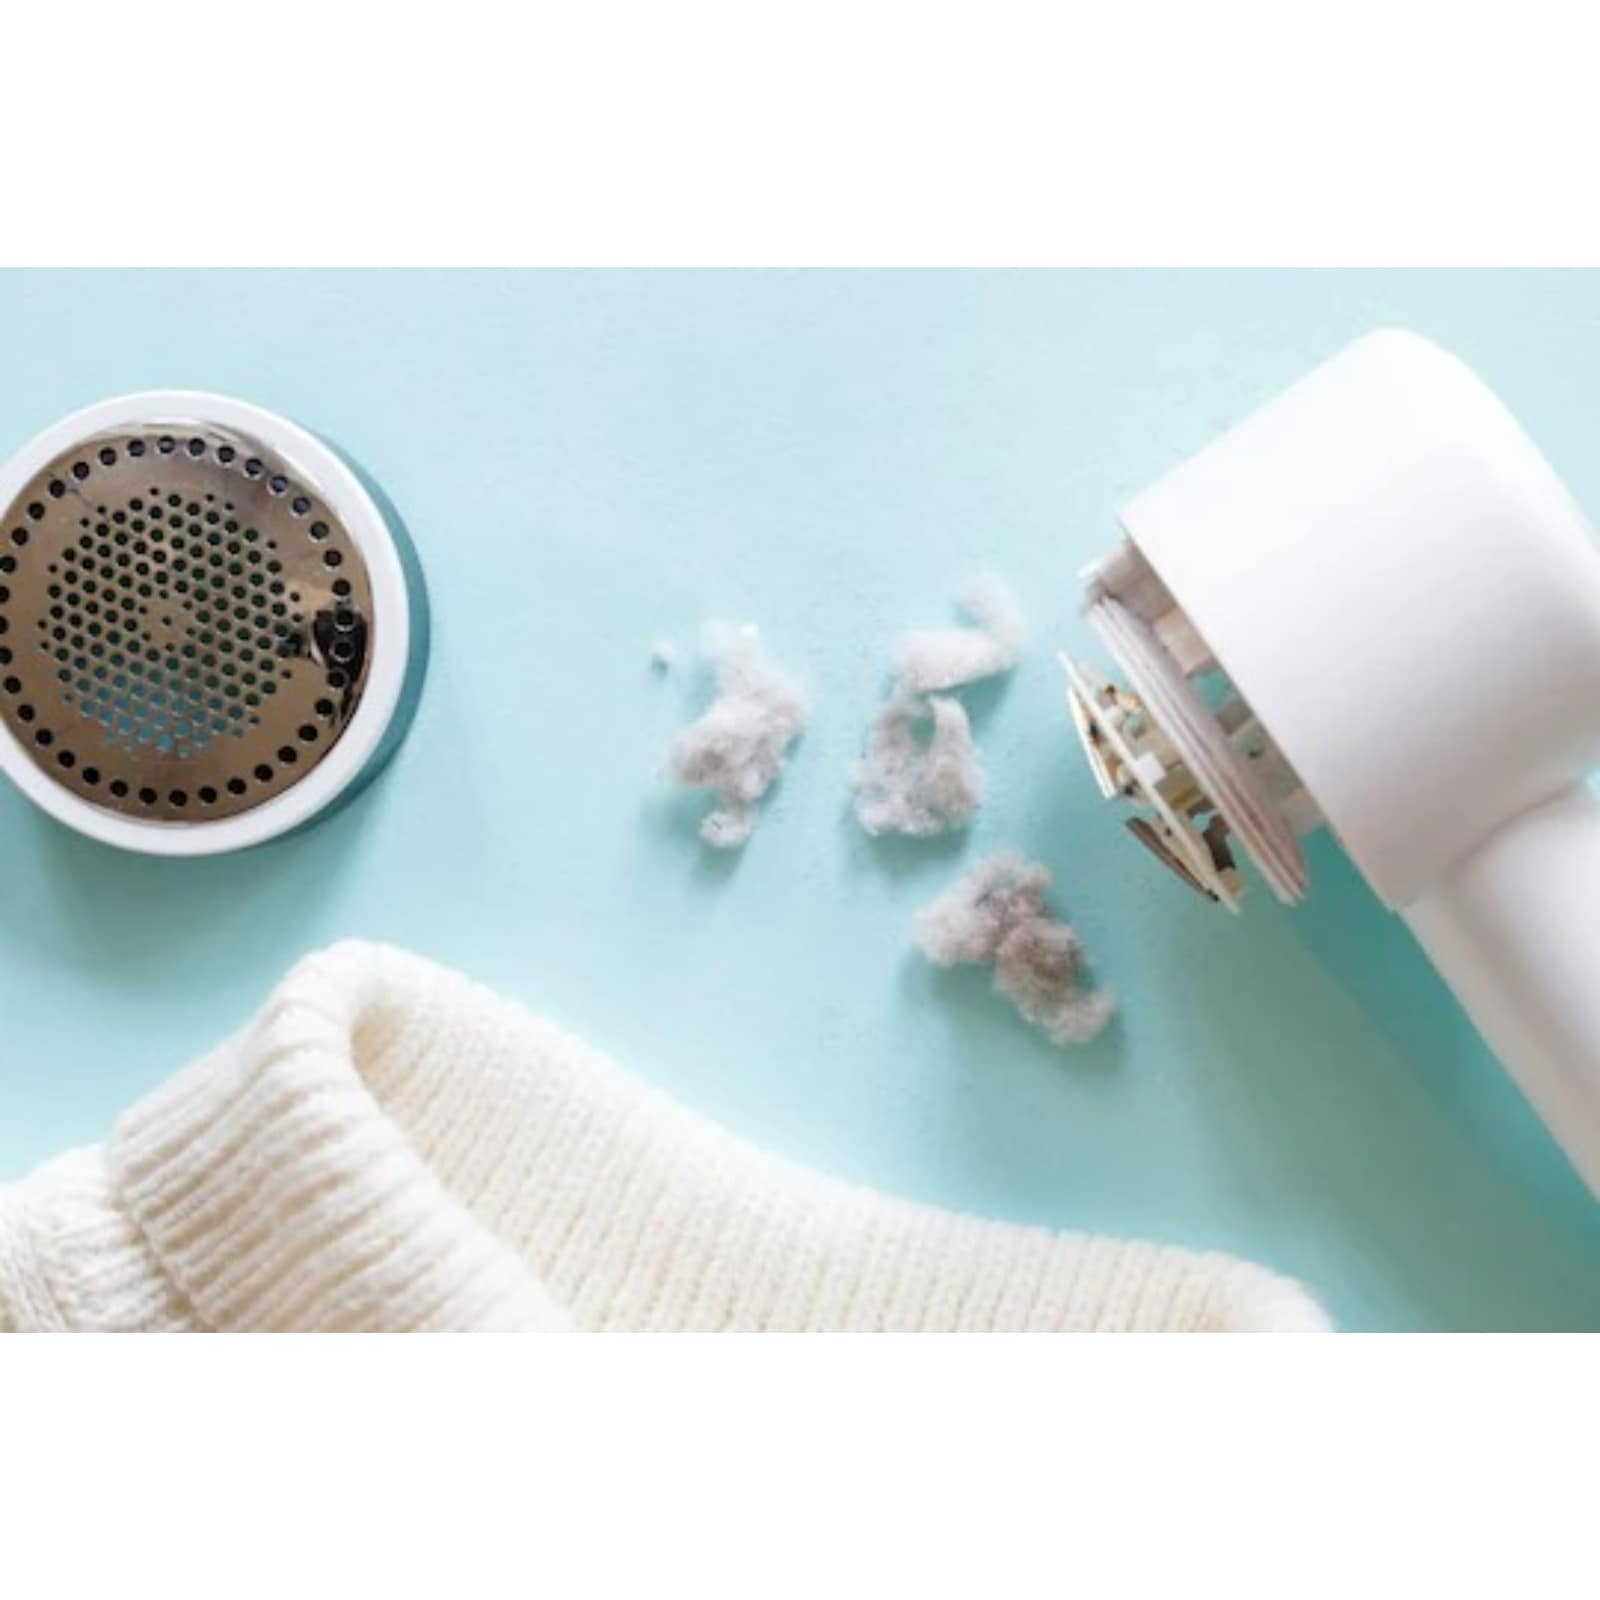 Five Easy Hacks To Remove Lint From Woolen Clothes This Winter - News18